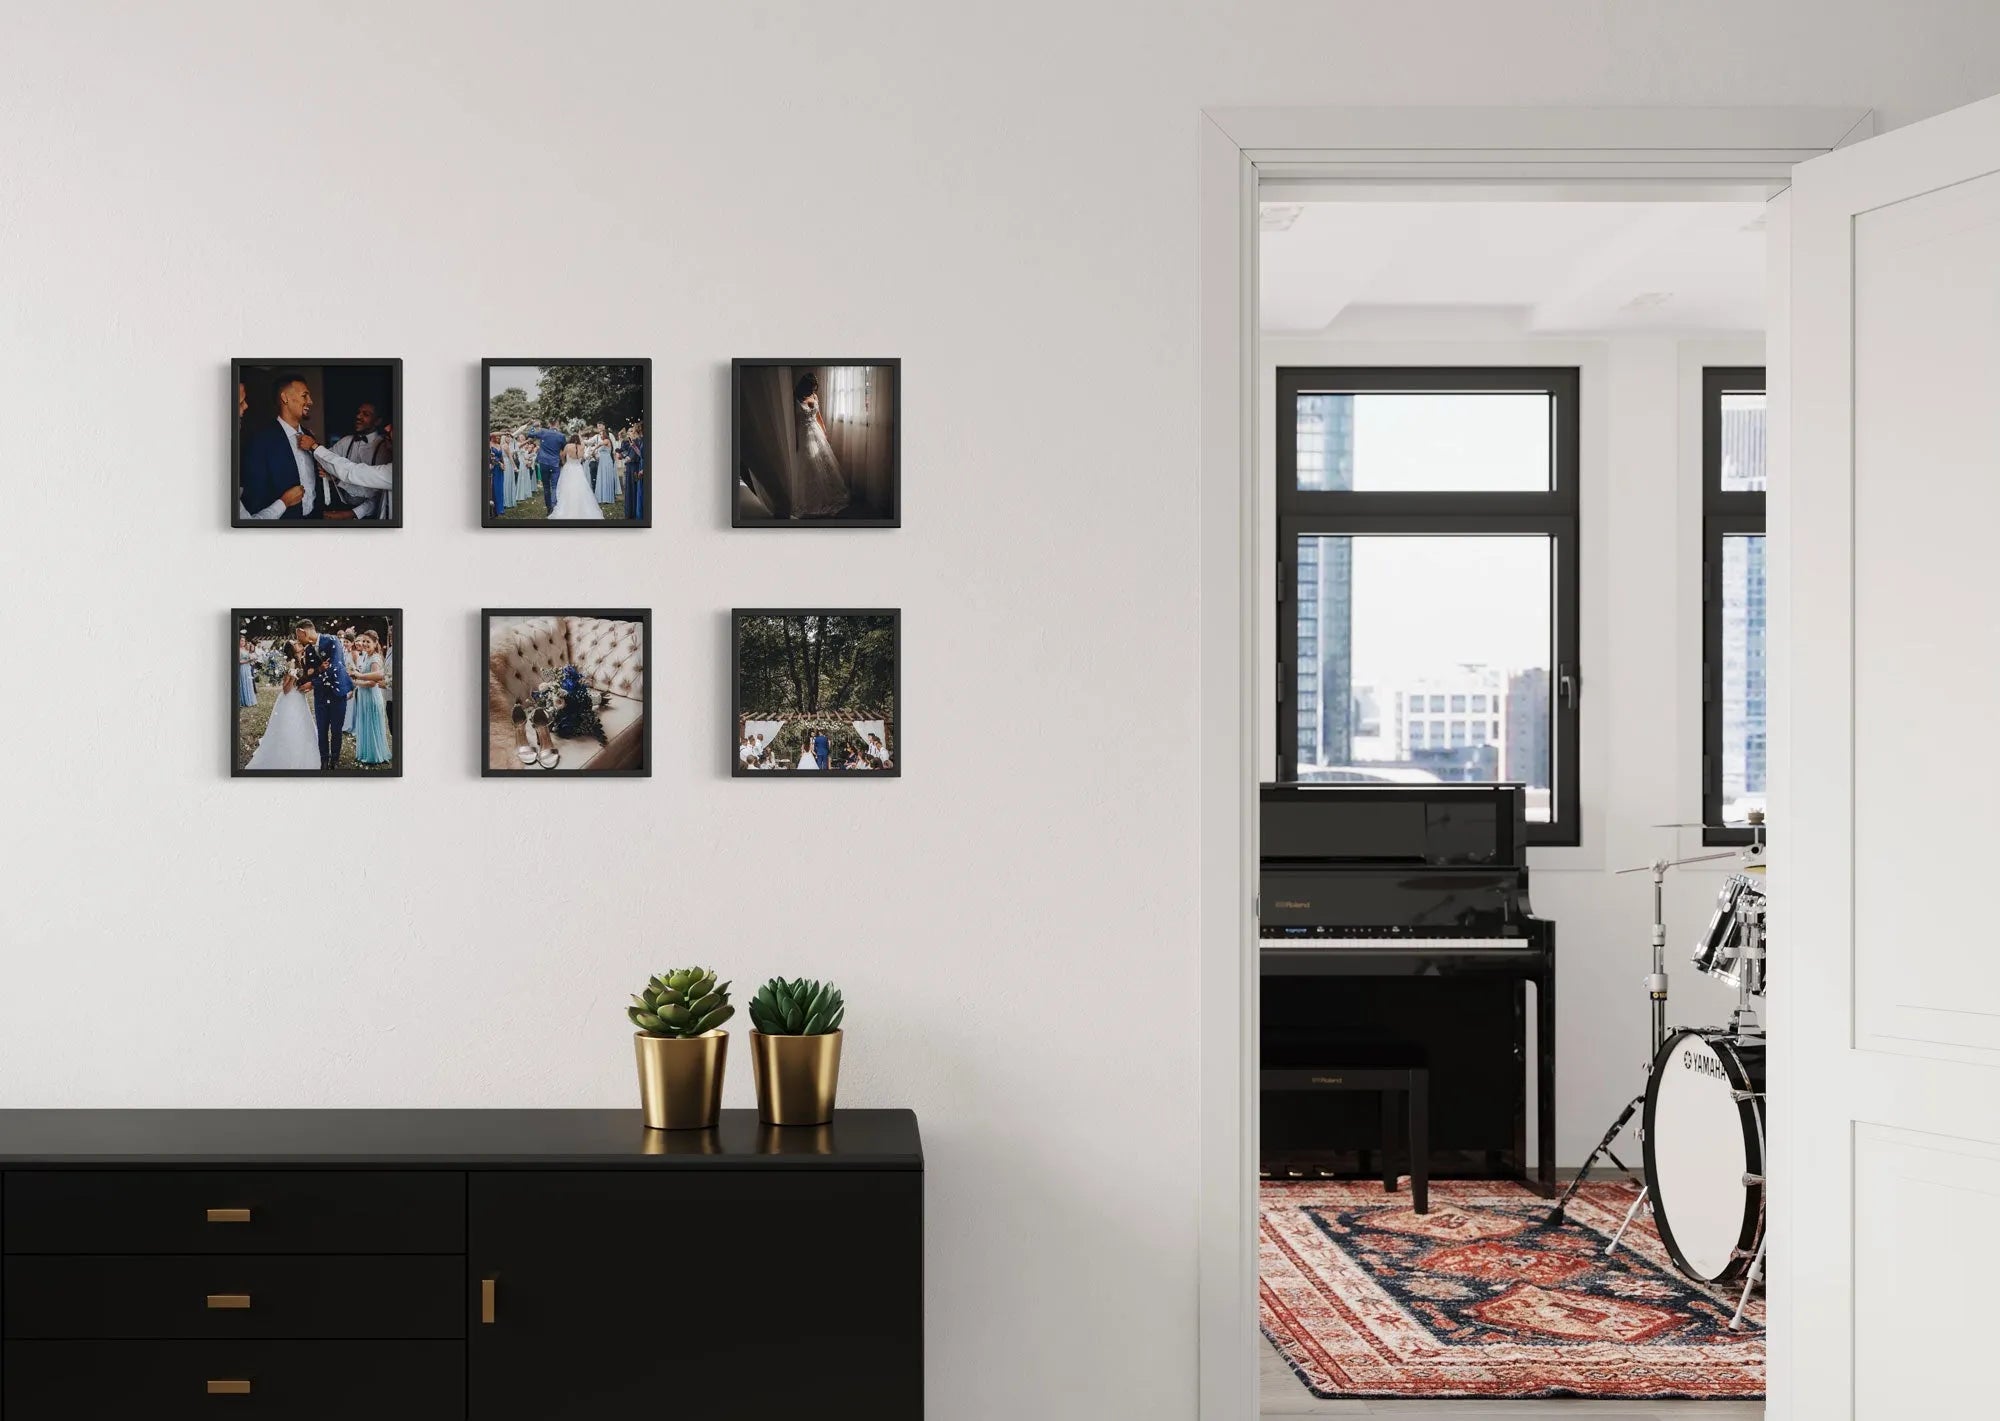 How to Choose the Right Photo Tiles for Your Home